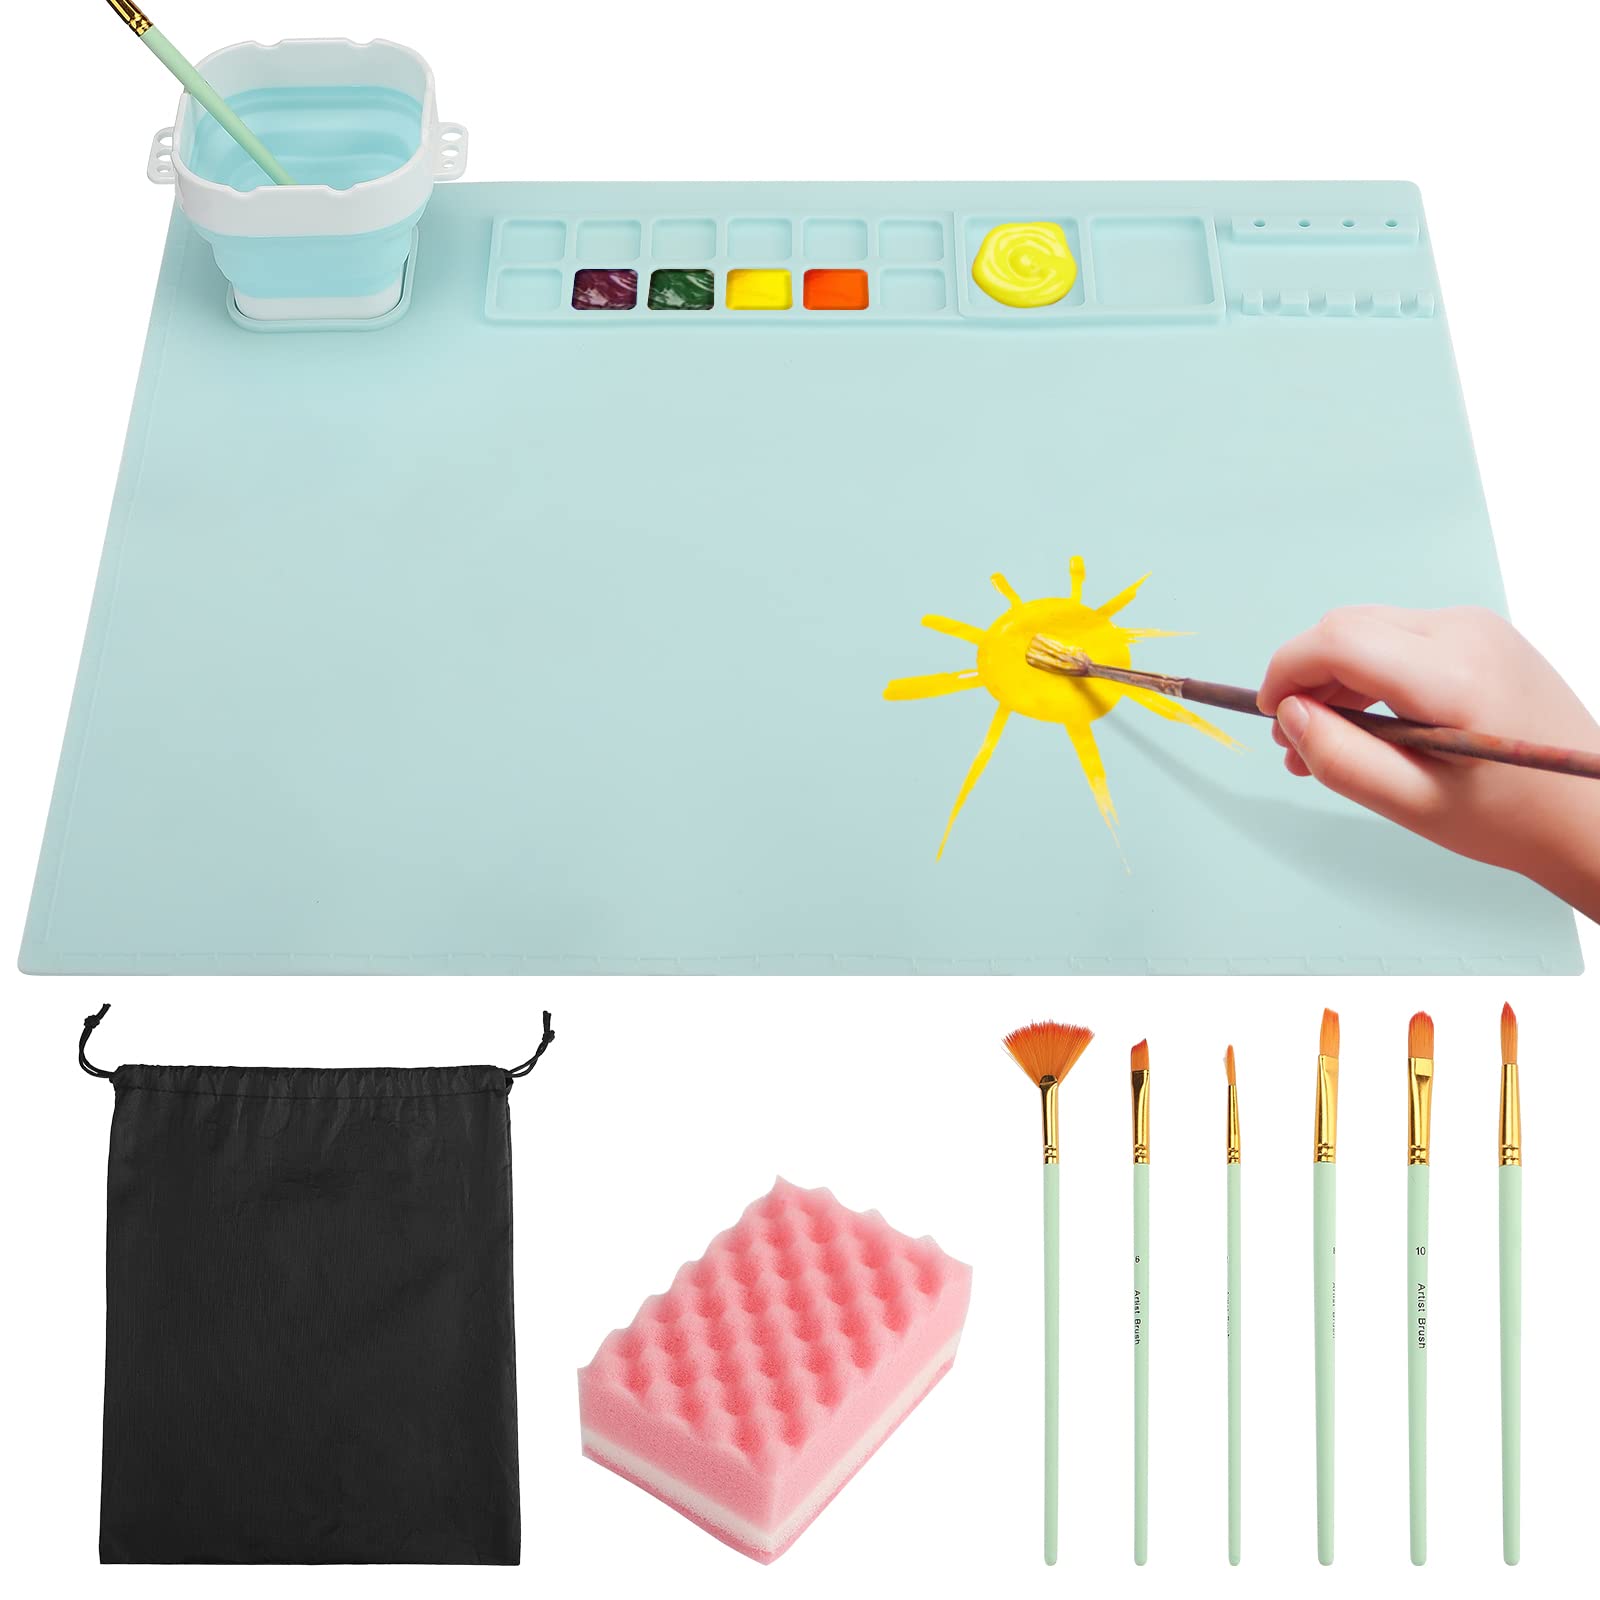 Atrusu Silicone Craft Mat Silicone Mats for Crafts 20X16 Inch